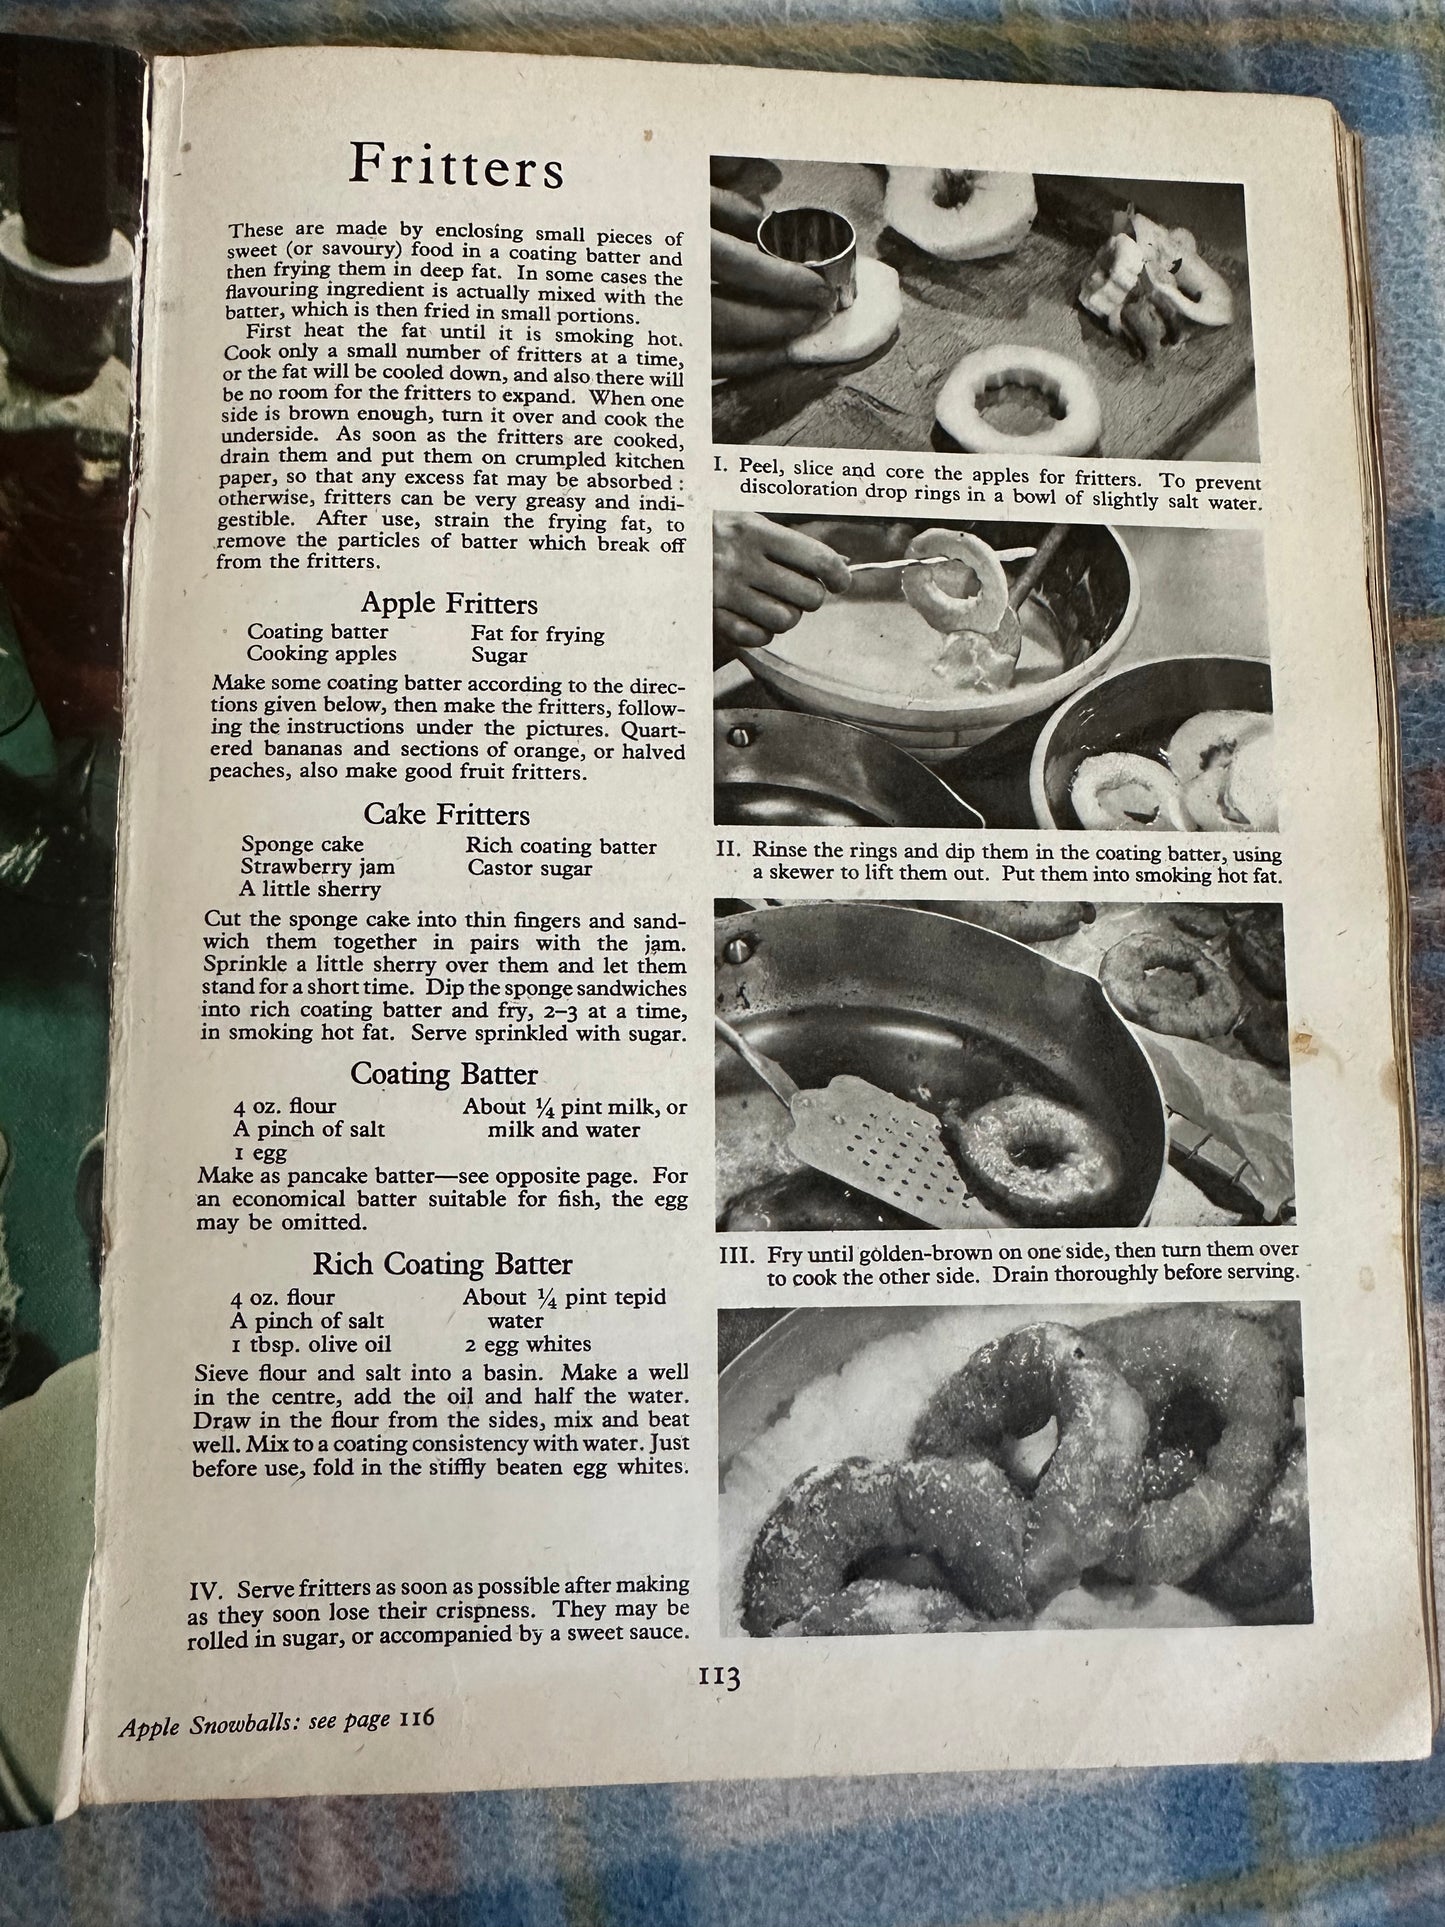 1951 Good Housekeeping’s Picture Cookery(The National Magazine Co Ltd)